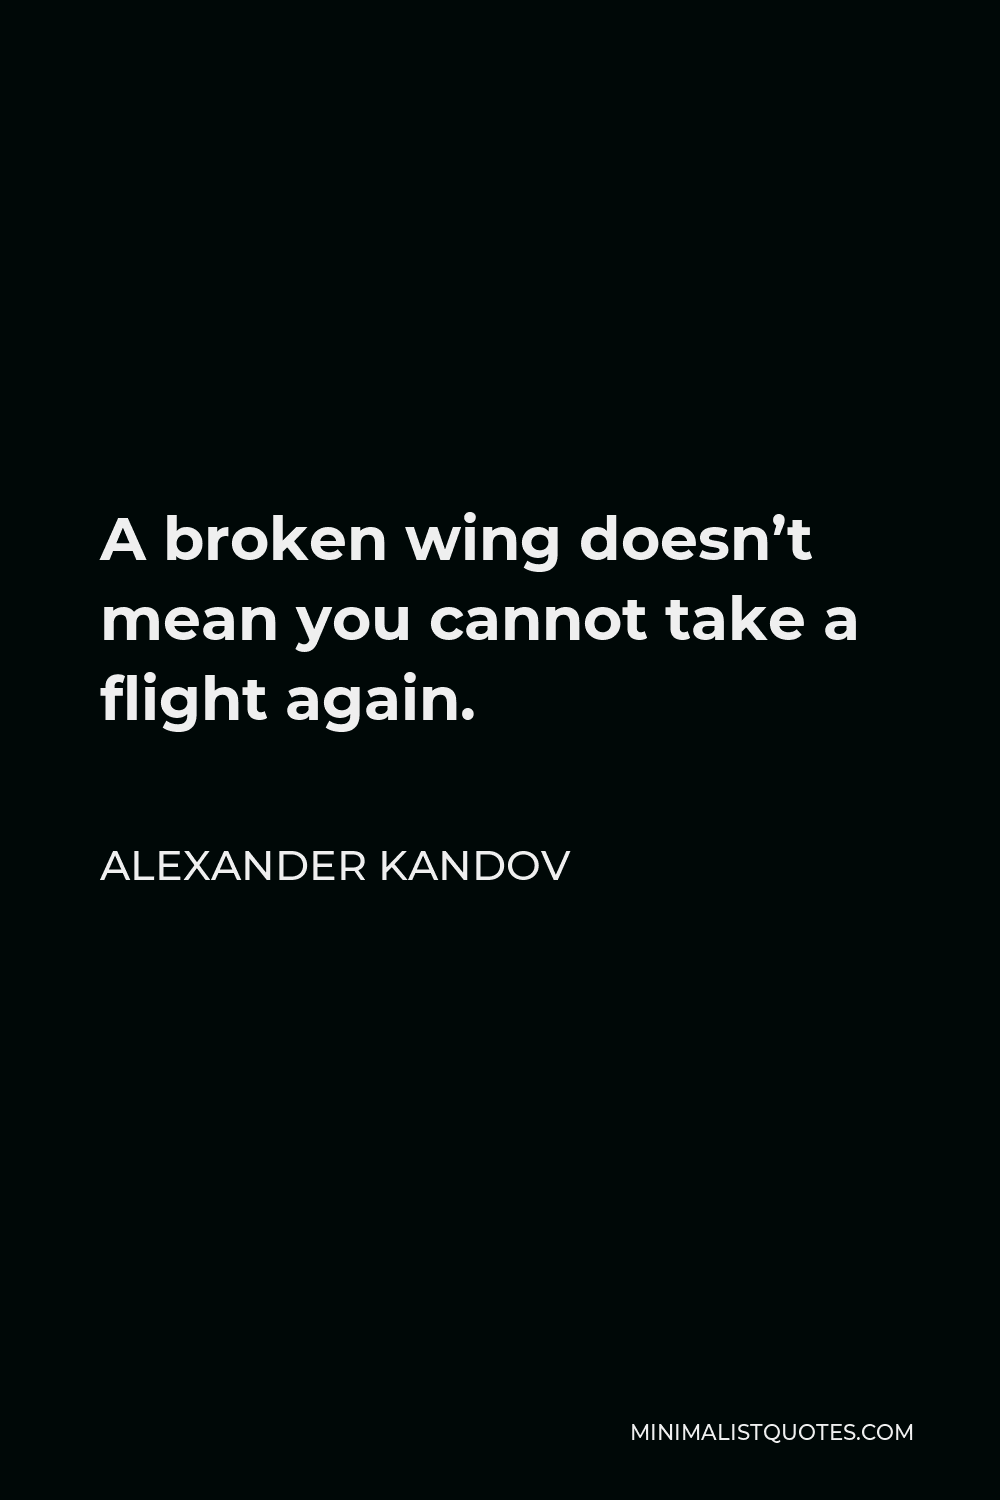 Alexander Kandov Quote - A broken wing doesn’t mean you cannot take a flight again.